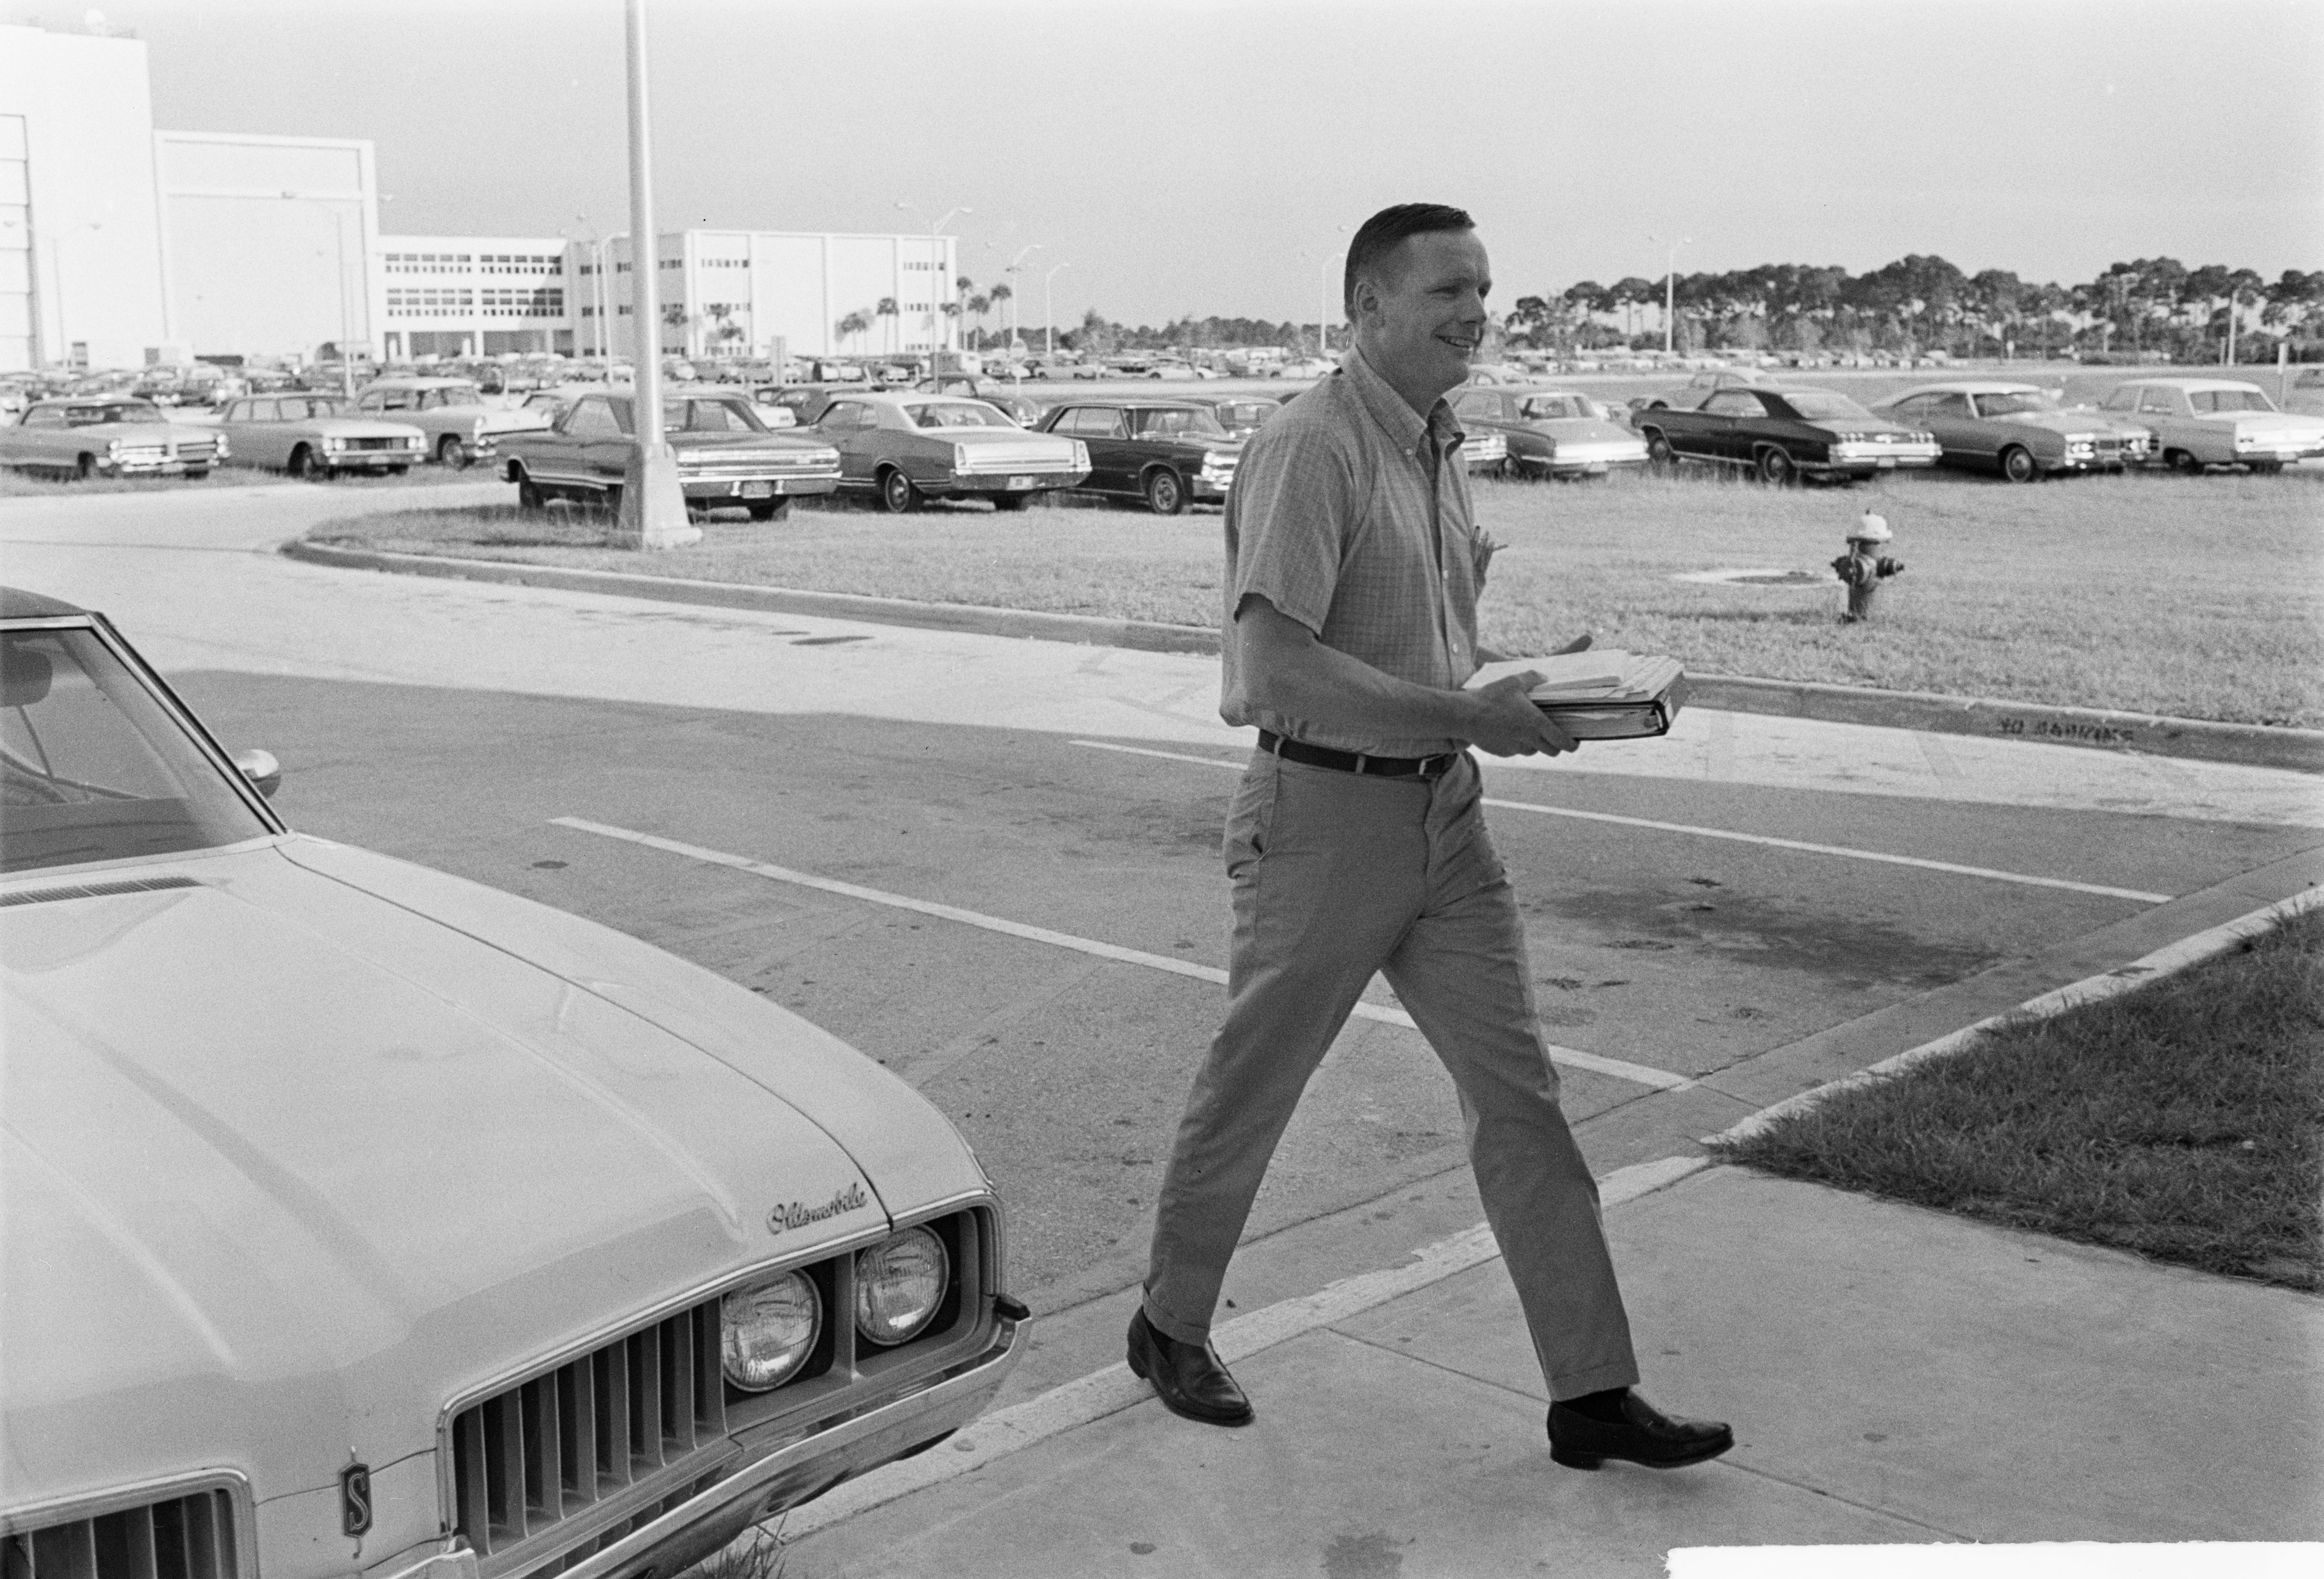 Apollo 11 astronaut Neil A. Armstrong arrive for work at NASA’s Kennedy Space Center in Florida four days before launch